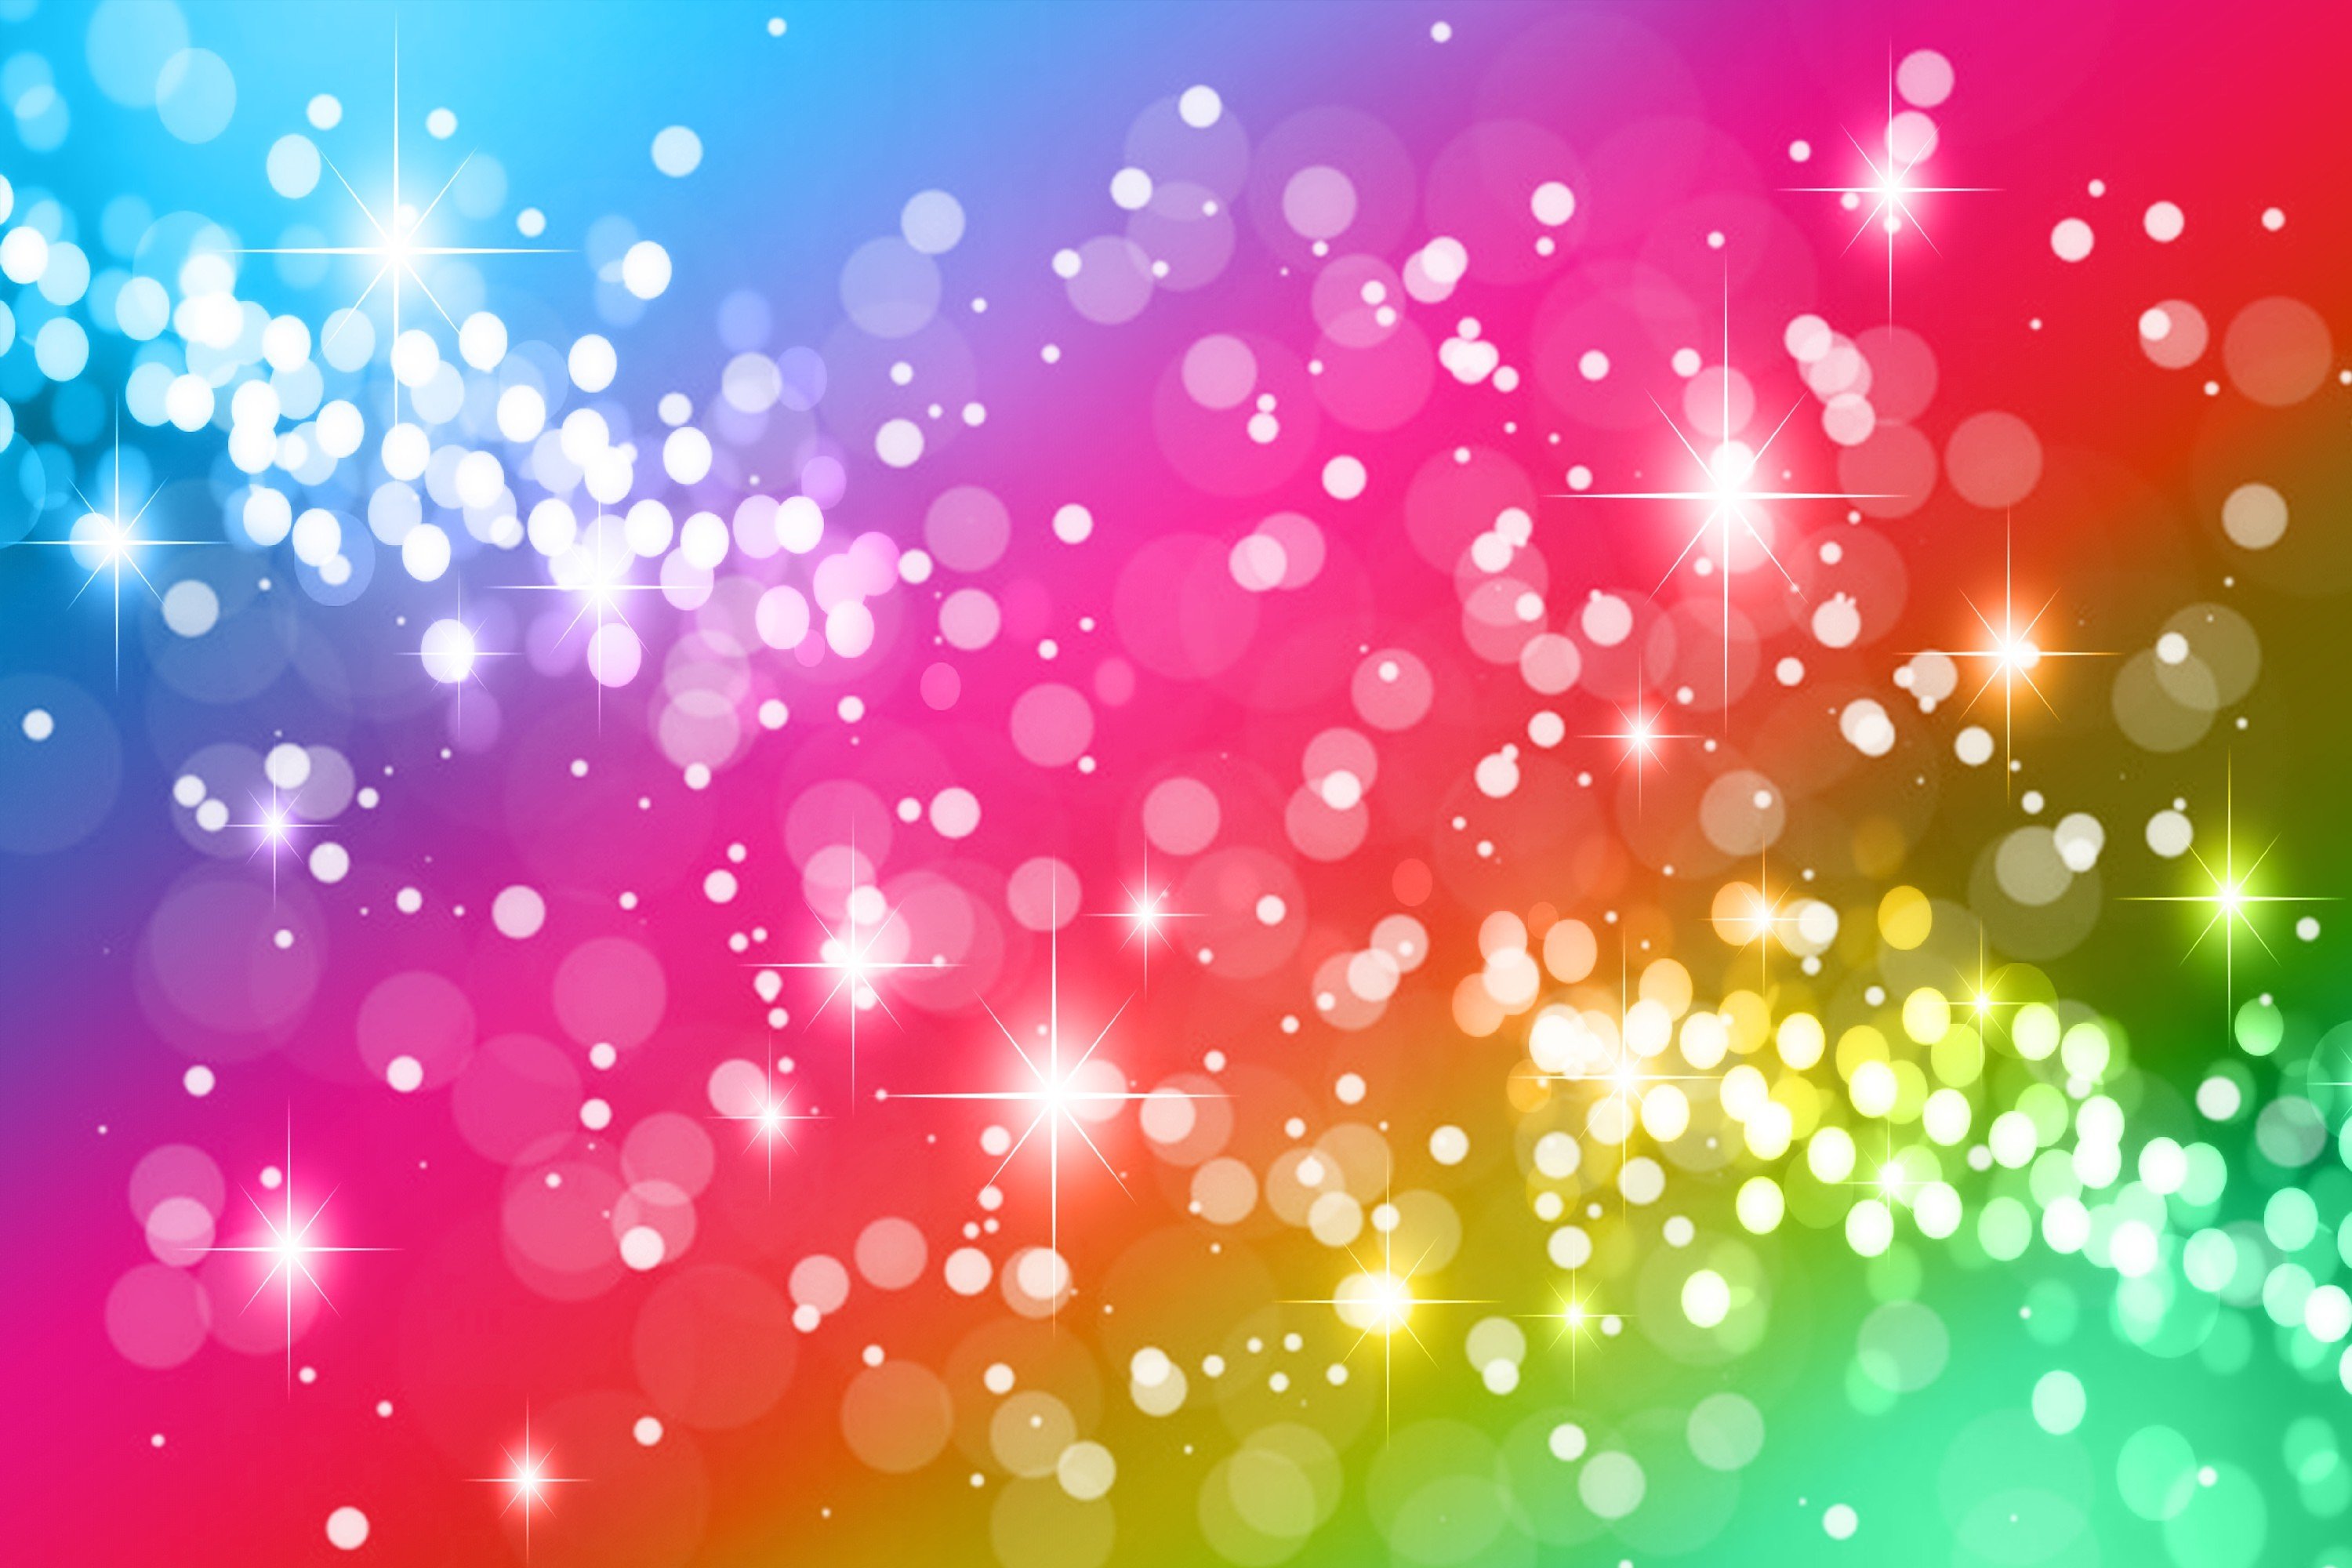 Glitter Wallpapers Sparkly HD Background by Janice Ong